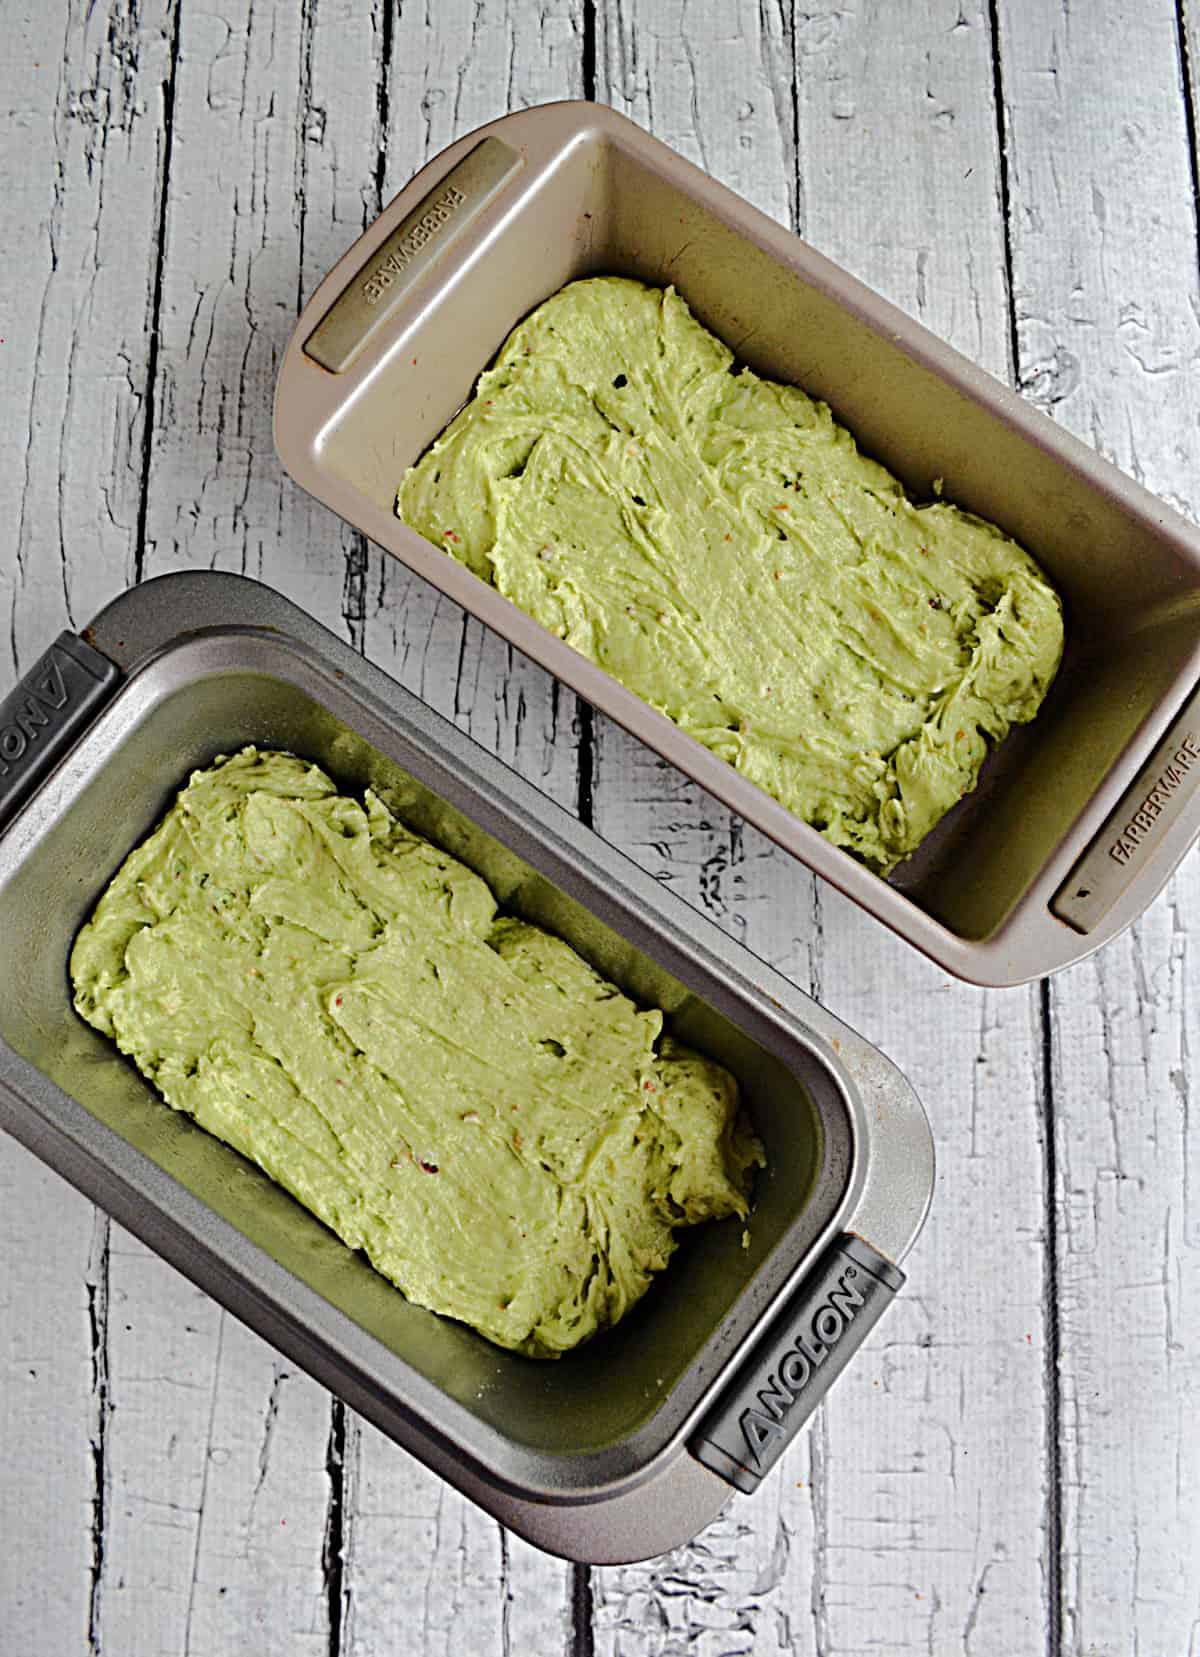 Two loaf pans filled with pistachio cake batter.